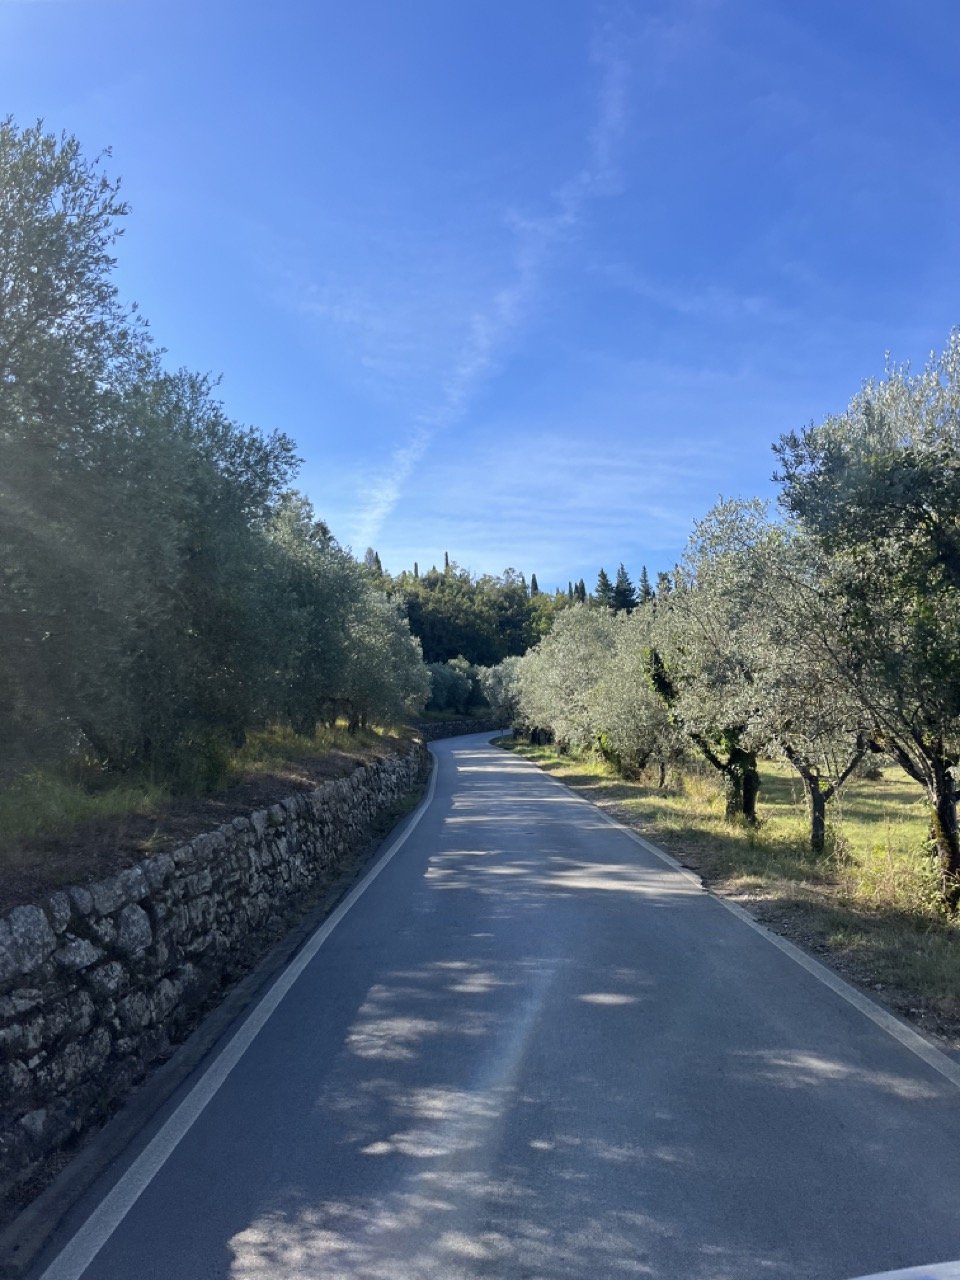 A bucolic country road lined by olive trees and a stone wall near to San Casciano in Val di Pesa, in the Chianti area of Tuscany.